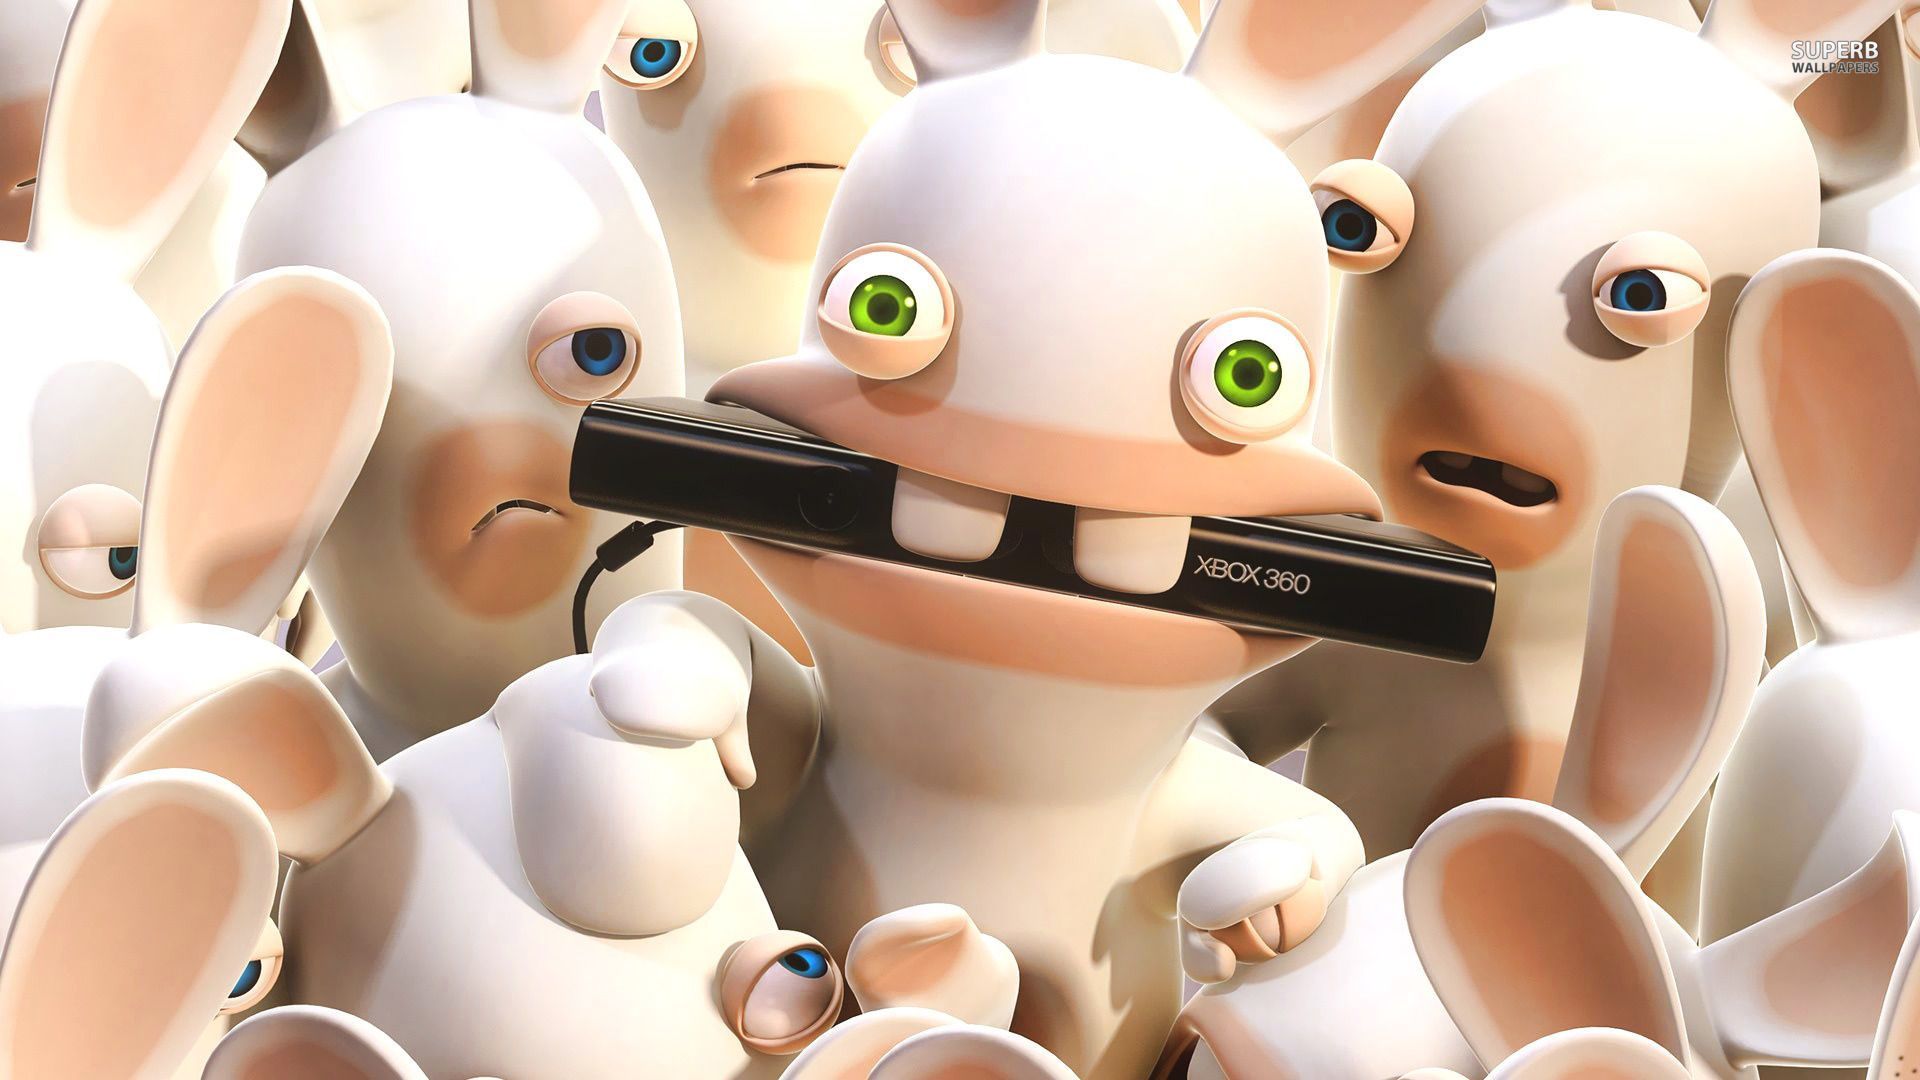 Rabbids, High Quality Wallpaper For Free